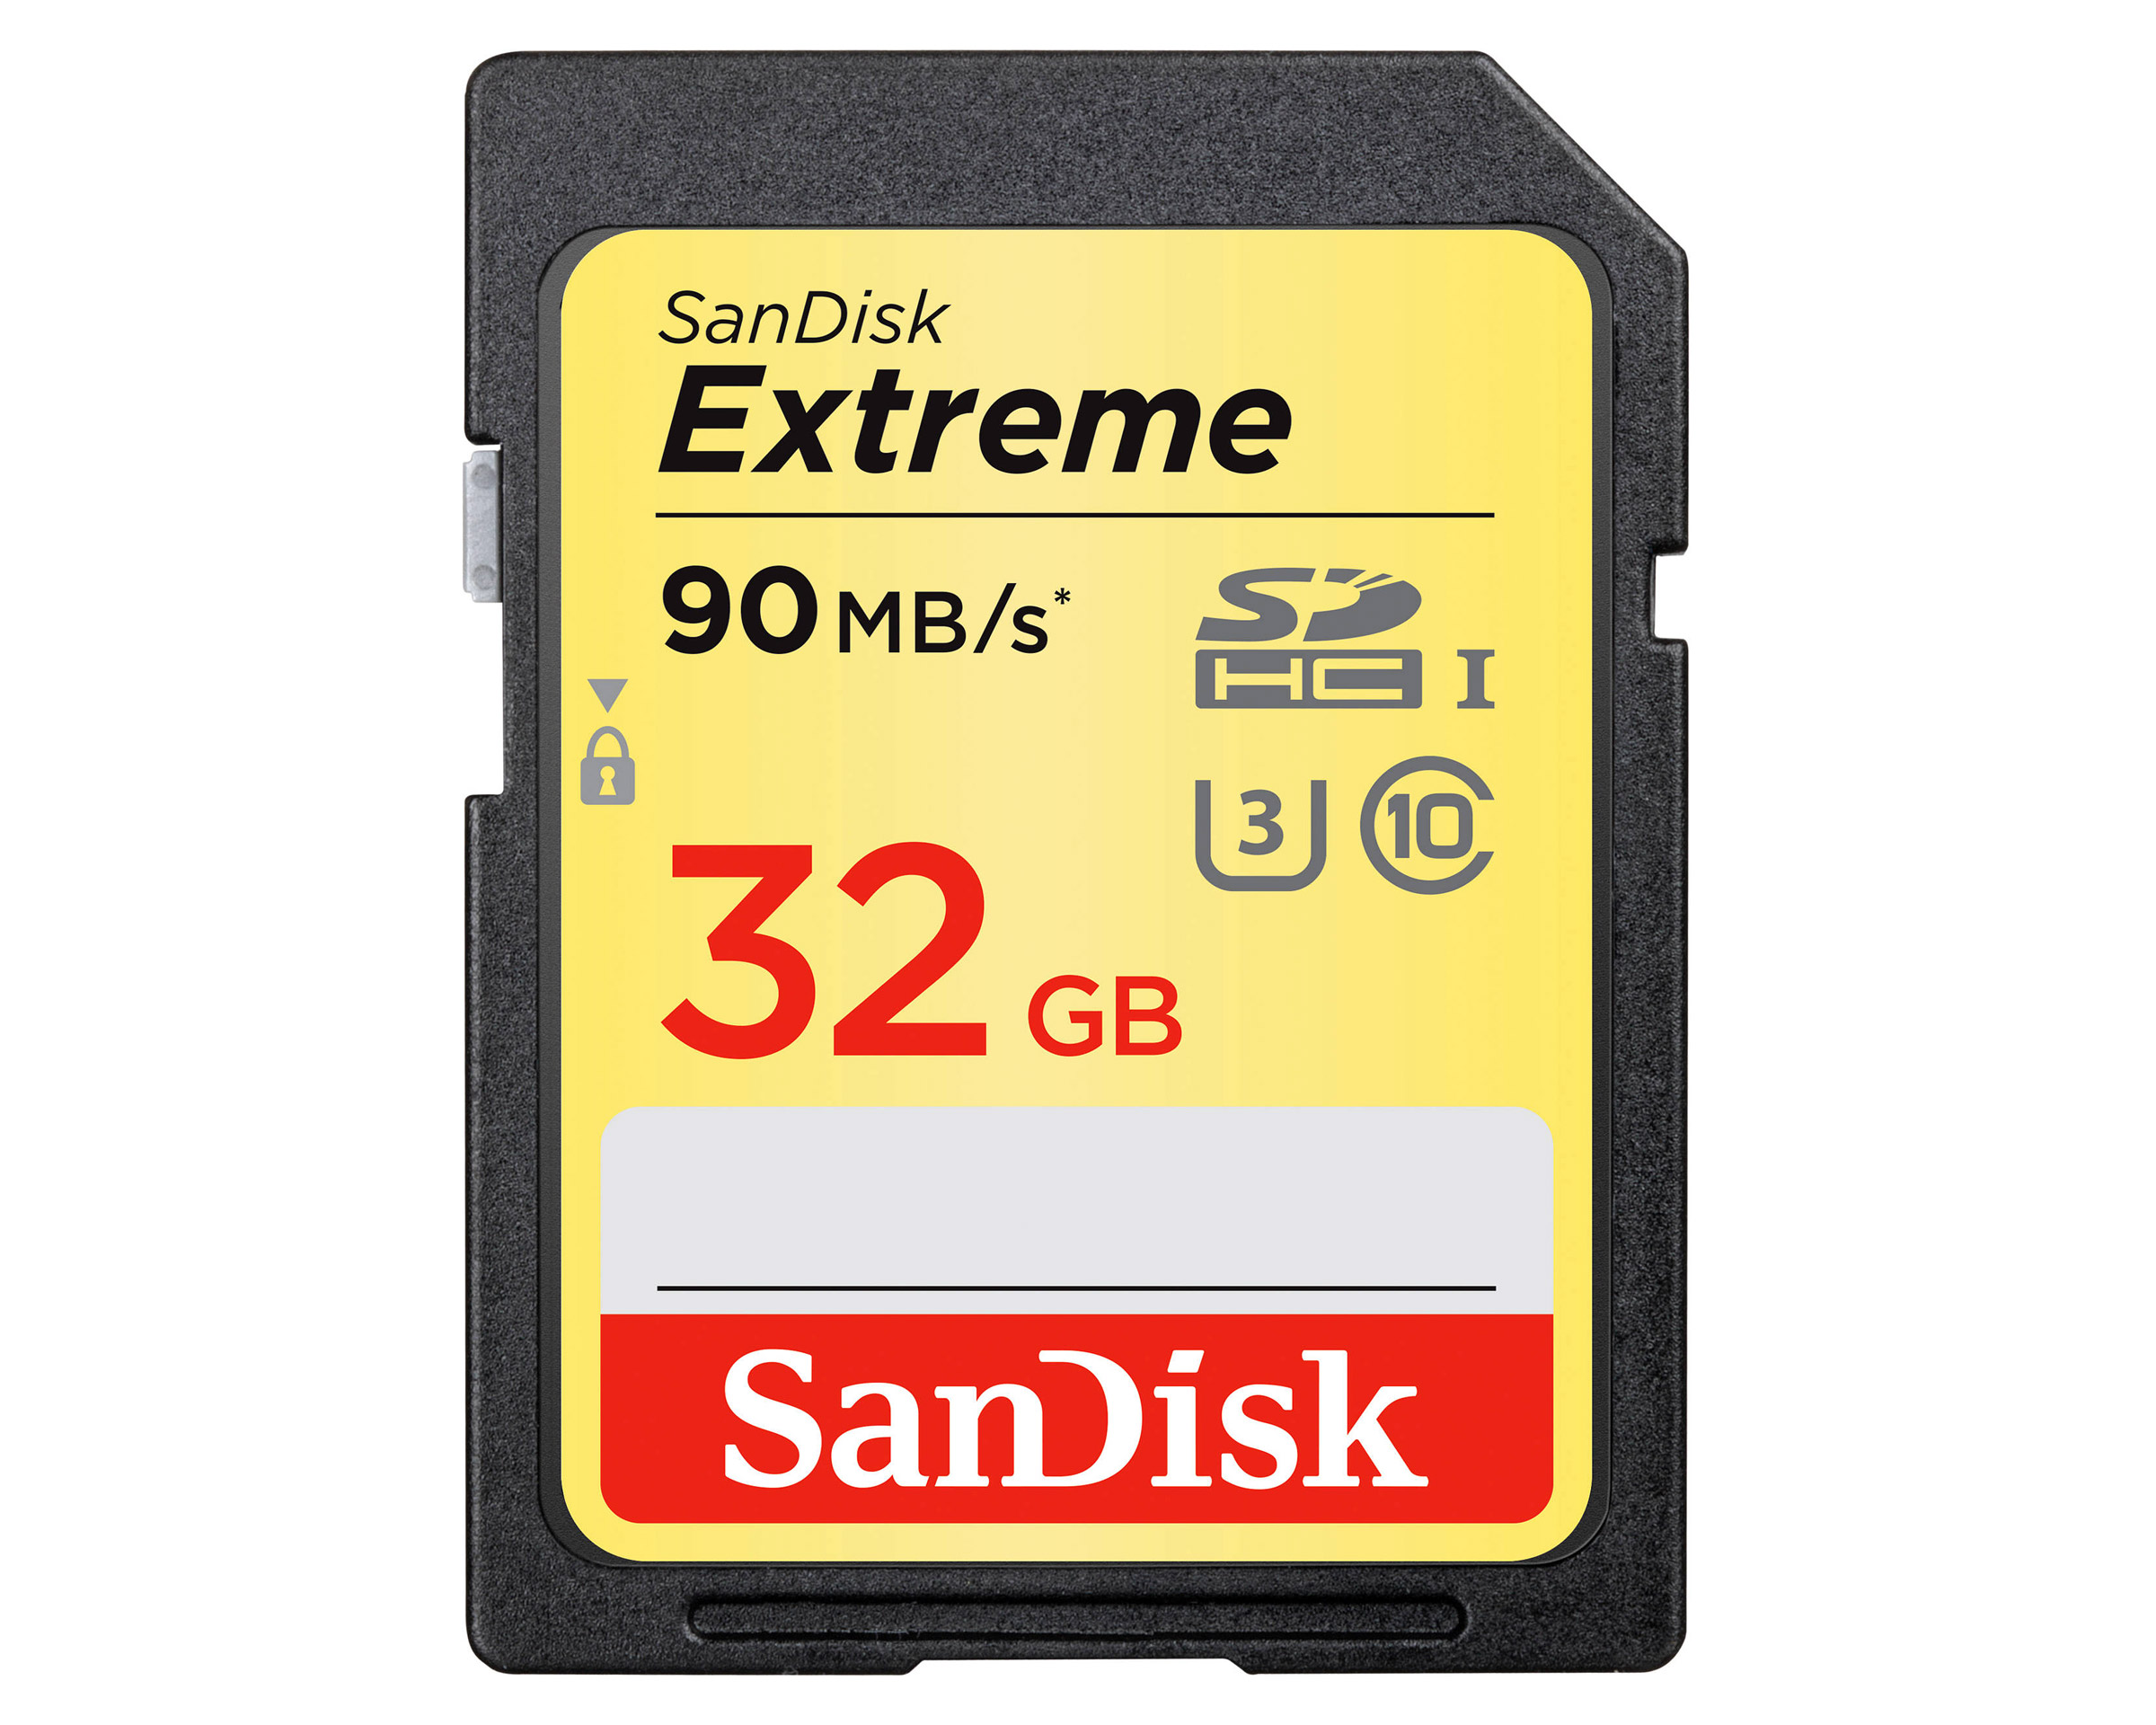 Sandisk Extreme SDHC 32 GB (90 MB/s)